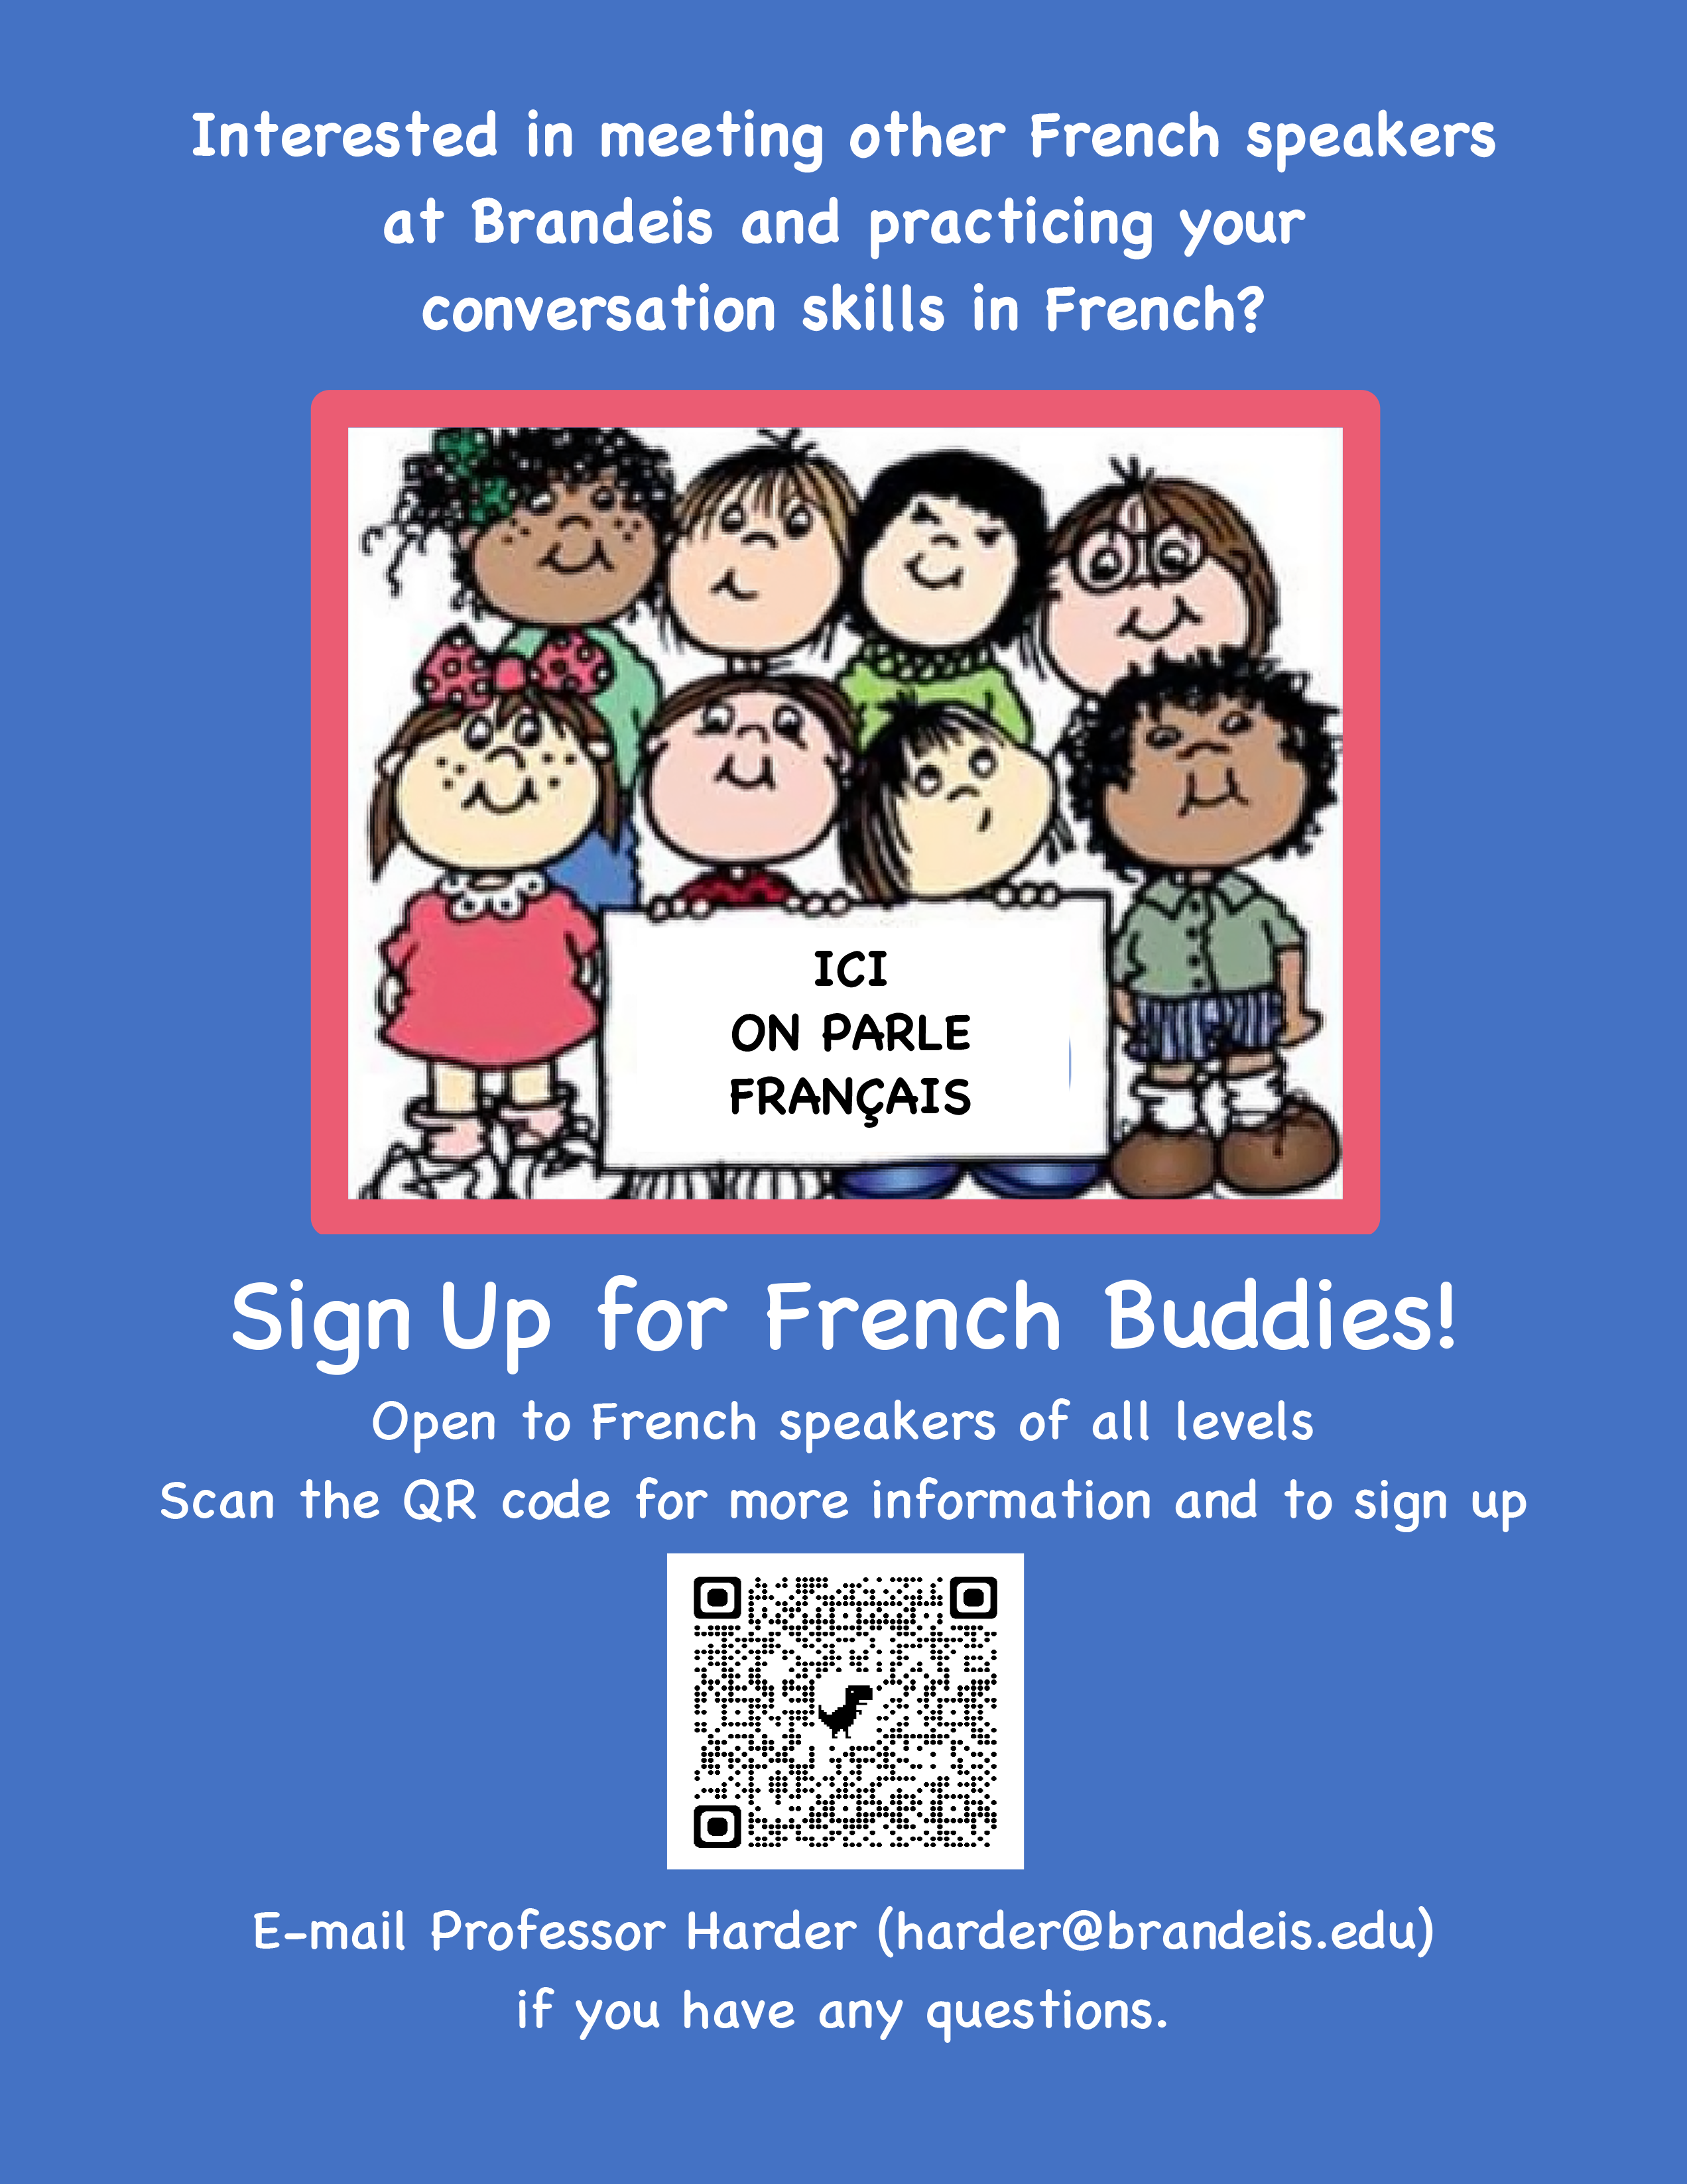 Interested in meeting other French speakers at Brandeis and practicing your conversation skills in French? Sign Up for French Buddies!  If you’re interested, fill out this Google Form! (or scan the QR code on the poster for more information and to sign up)  Open to French speakers of all levels.  E-mail Professor Harder (harder@brandeis.edu) if you have any questions.